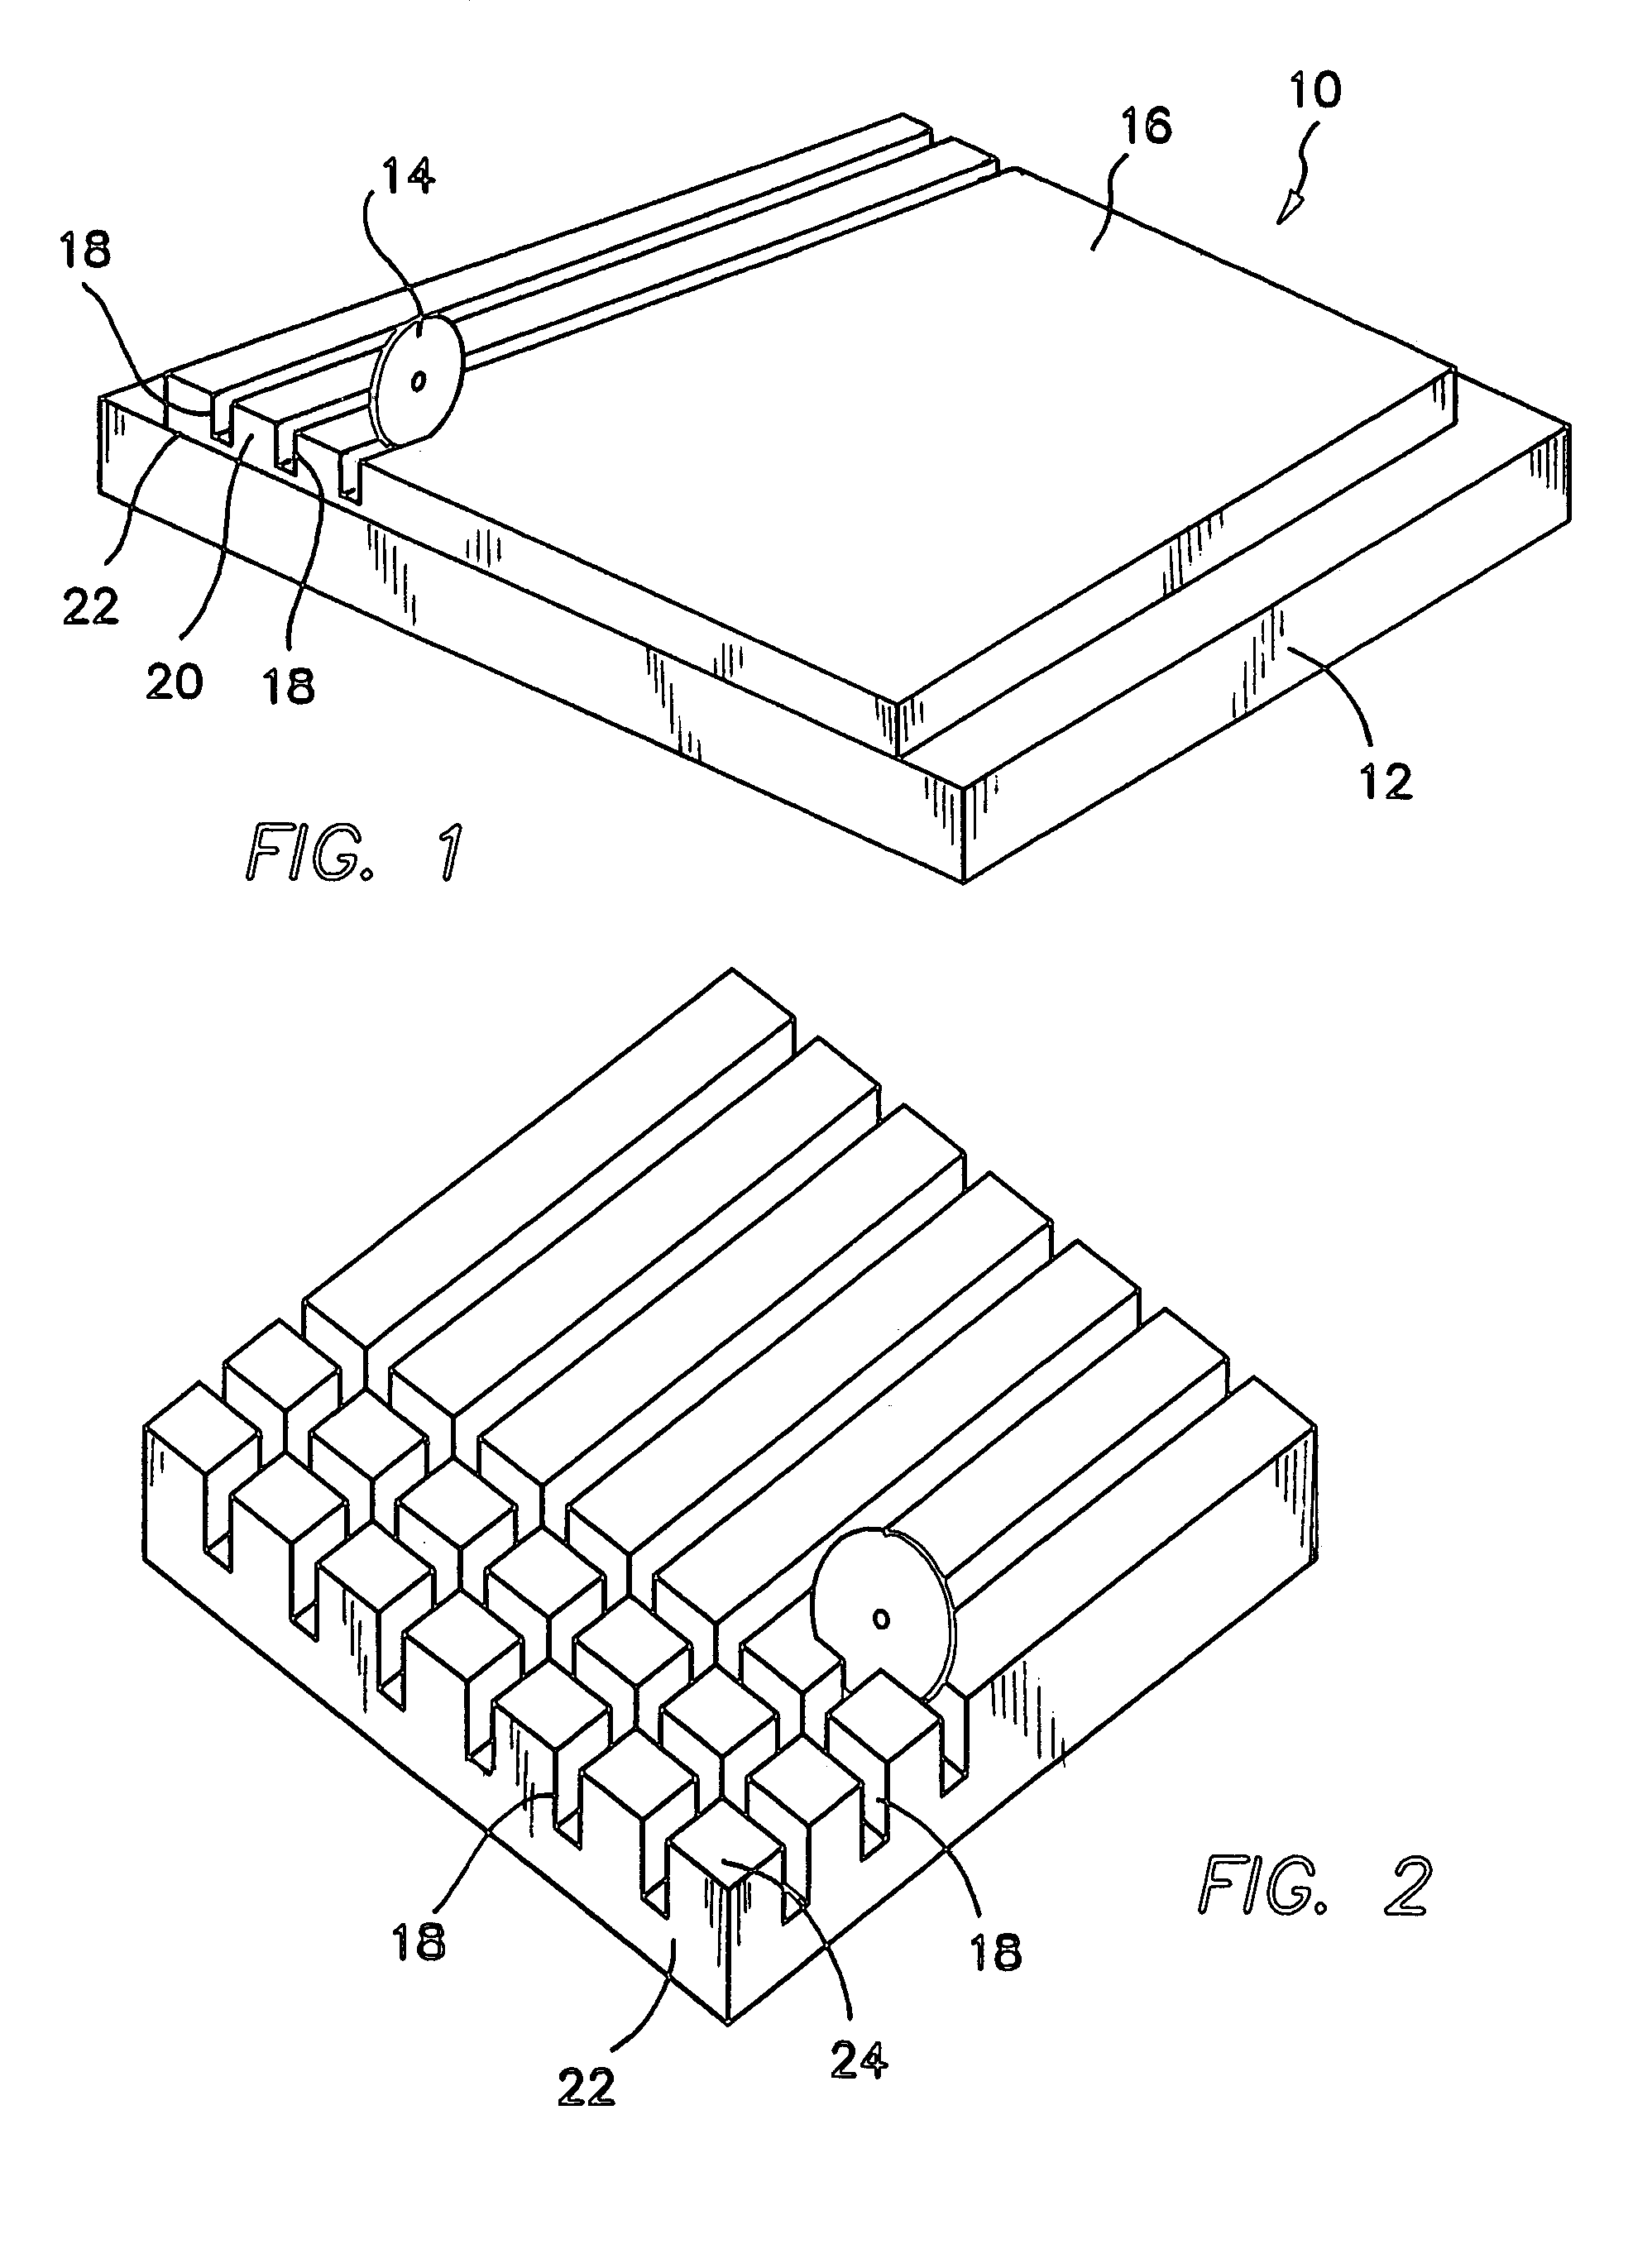 Method of sample preparation for atom probes and source of specimens